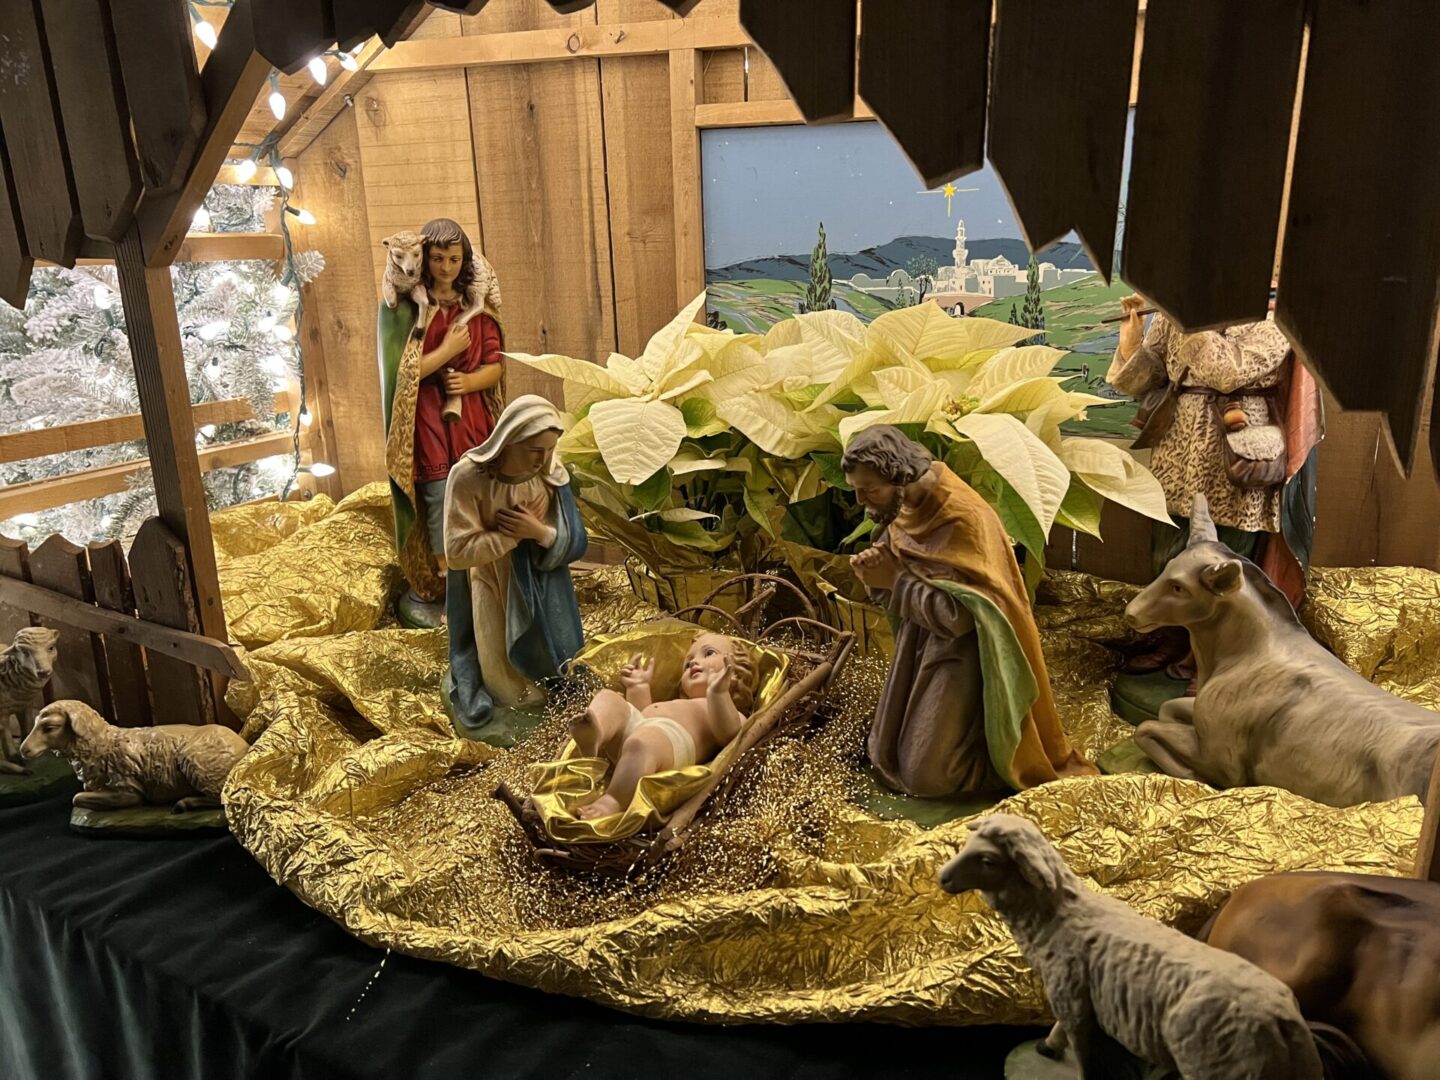 A nativity scene with the baby jesus in a manger.